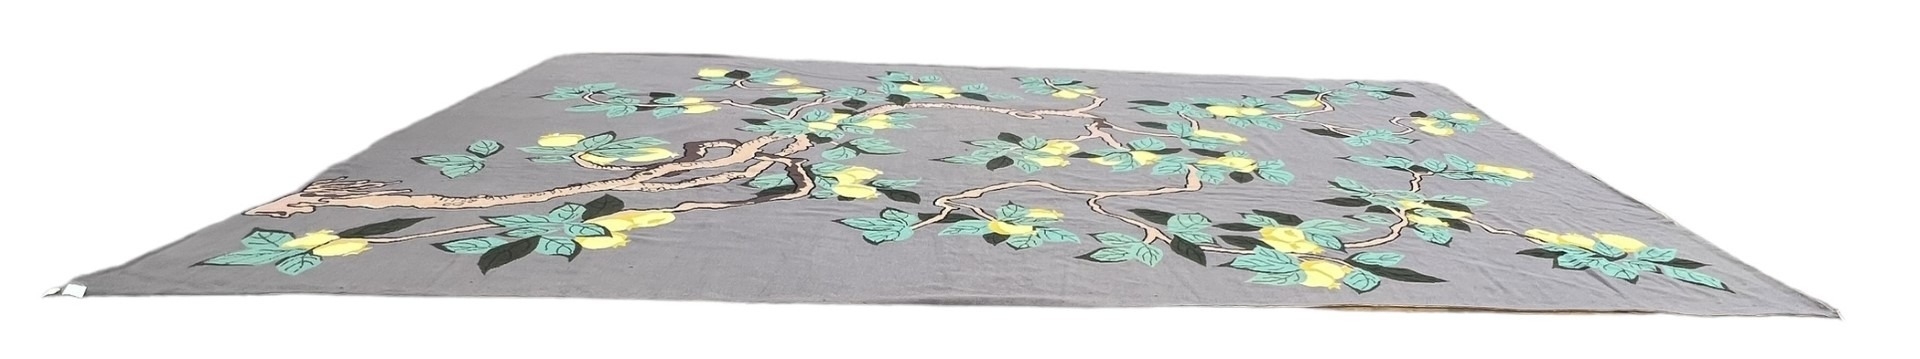 A MASSIVE NEEDLEWORK LEMON TREE (1950-60) ALL WOOL CANVAS CARPET/RUG. (790 x 470cm) Along with - Image 16 of 23